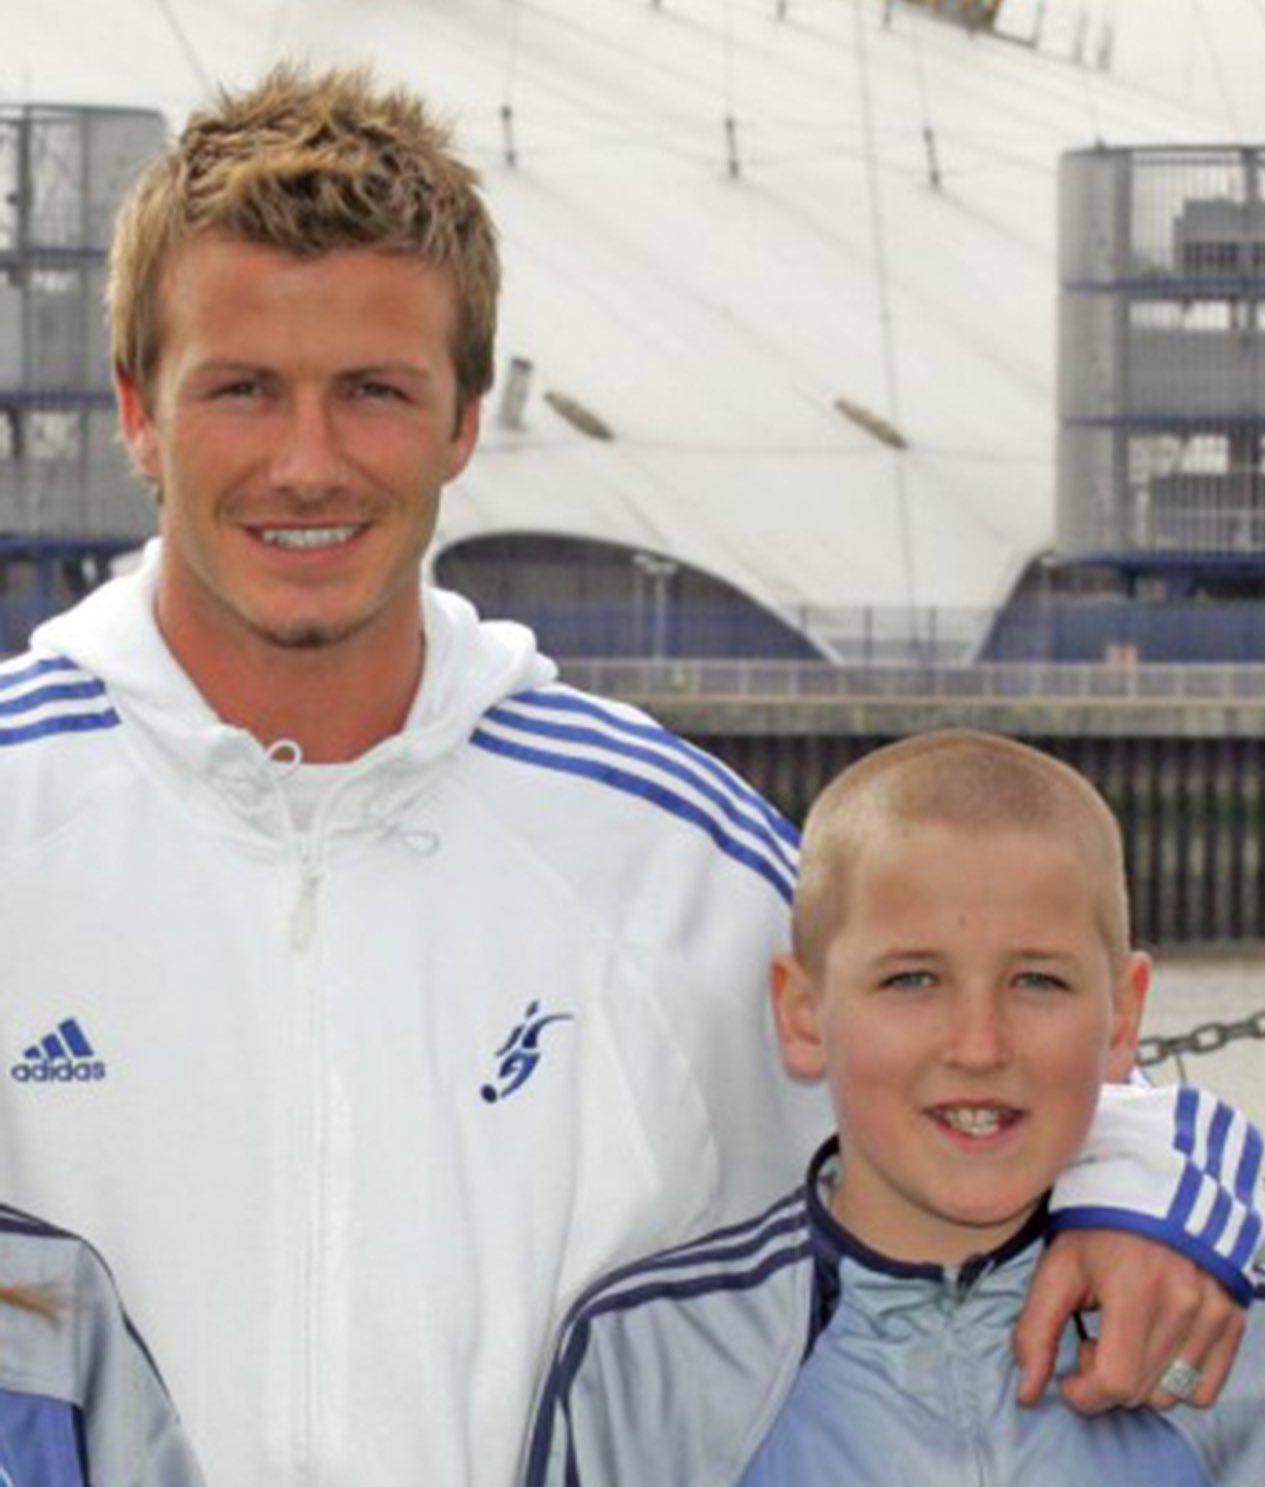 A very happy birthday to David Beckham.  Here he is with a young Harry Kane.  by 